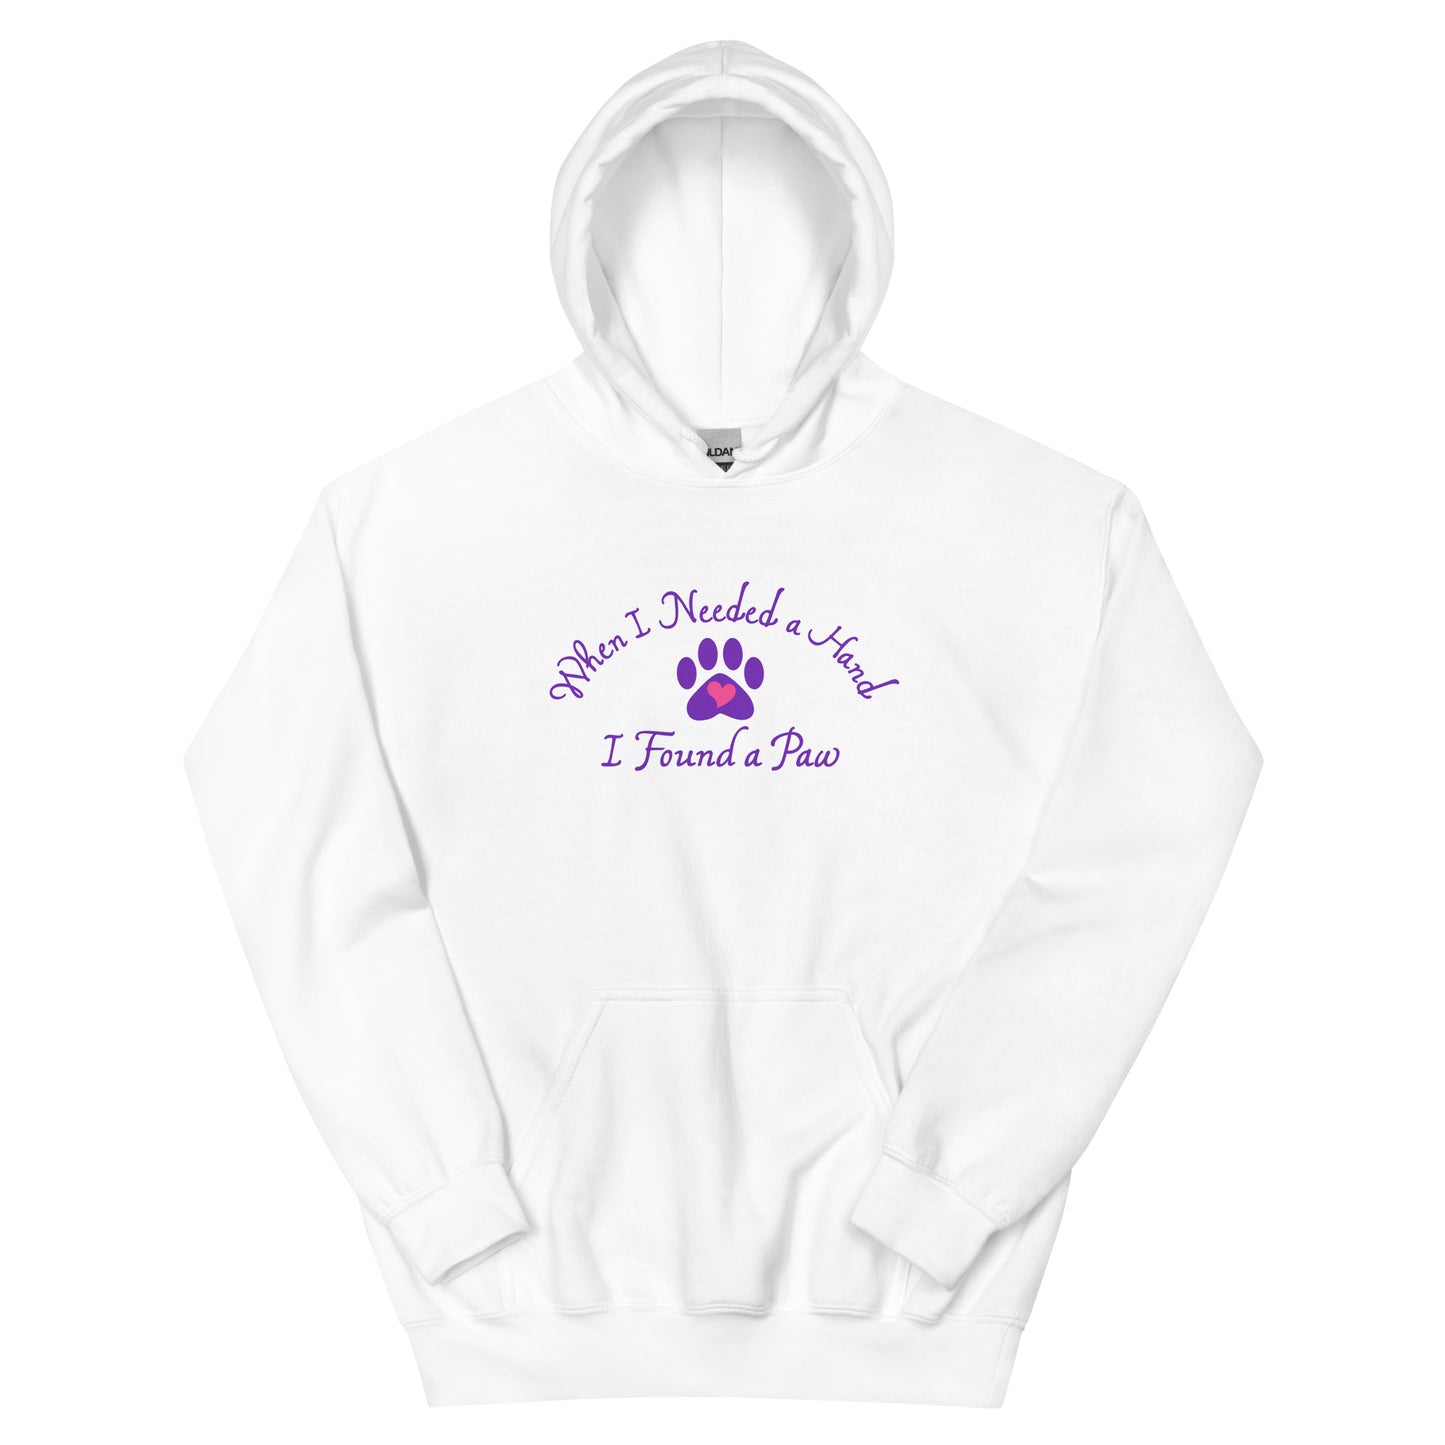 When I Needed a Hand I Found A Paw  Hoodie